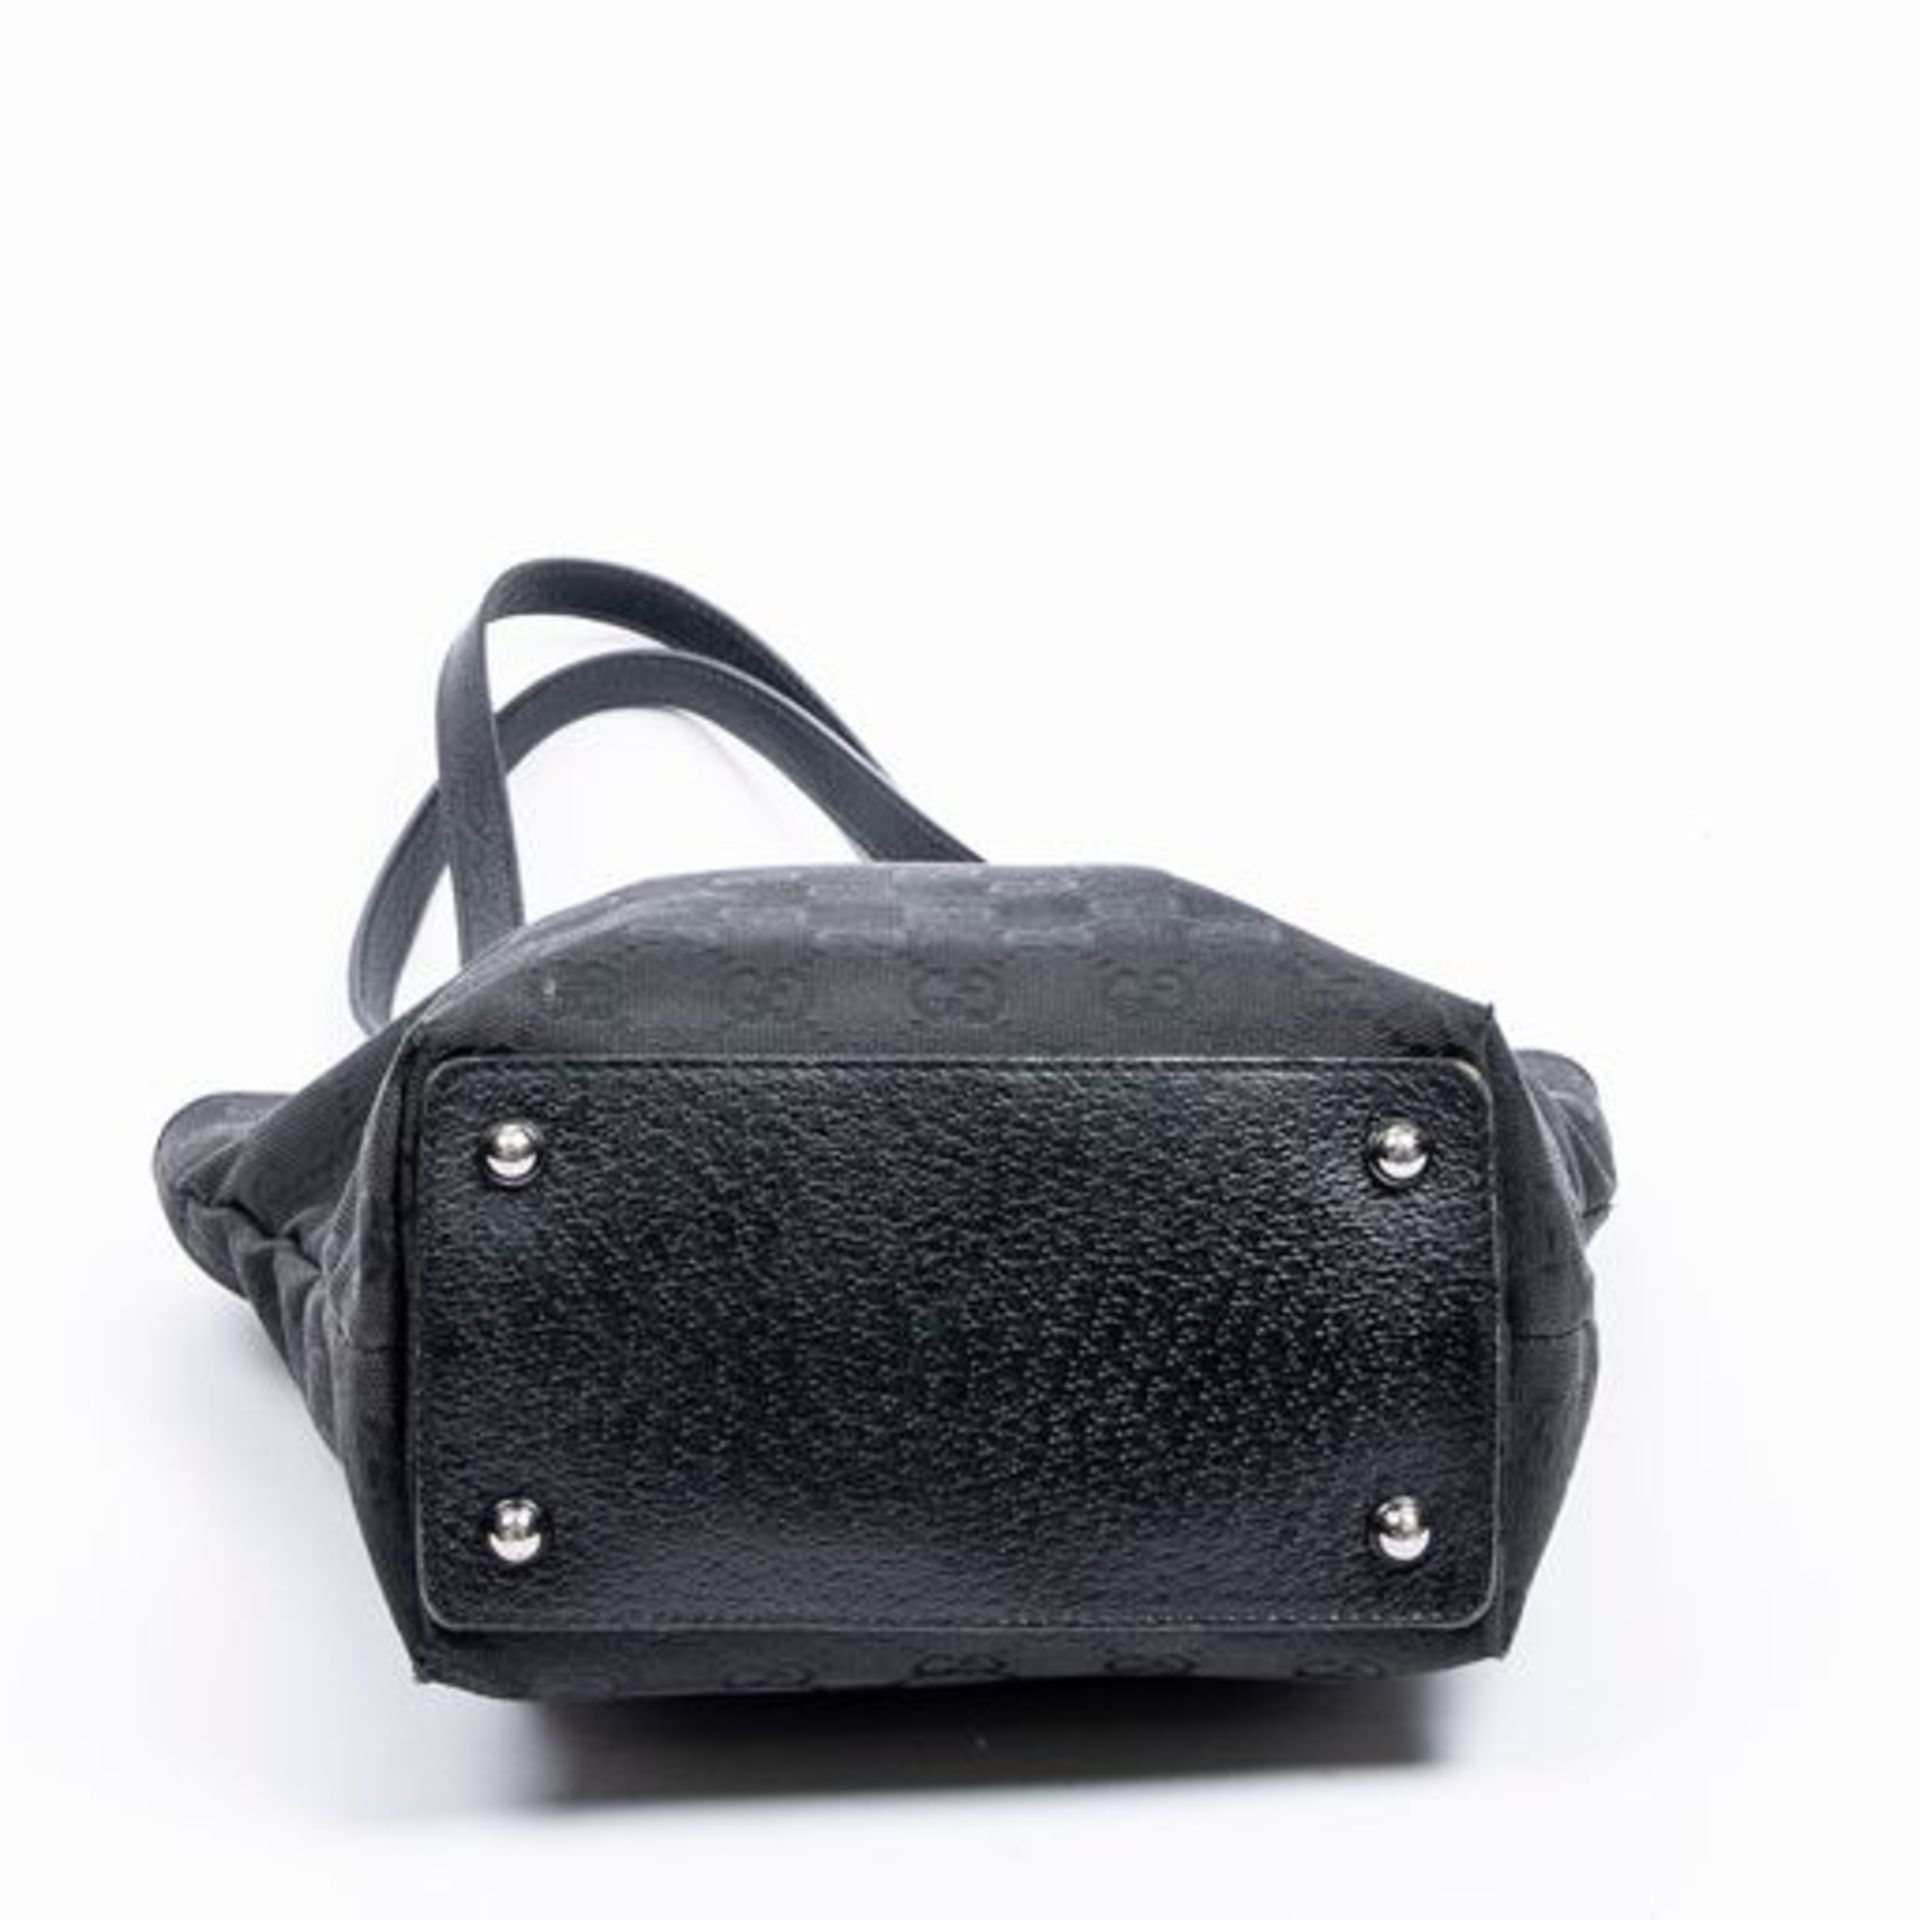 RRP £850 Gucci Eclipse Shopping Shoulder Bag Black - AAR0499 - Grade AB - (Bags Are Not On Site, - Image 5 of 7